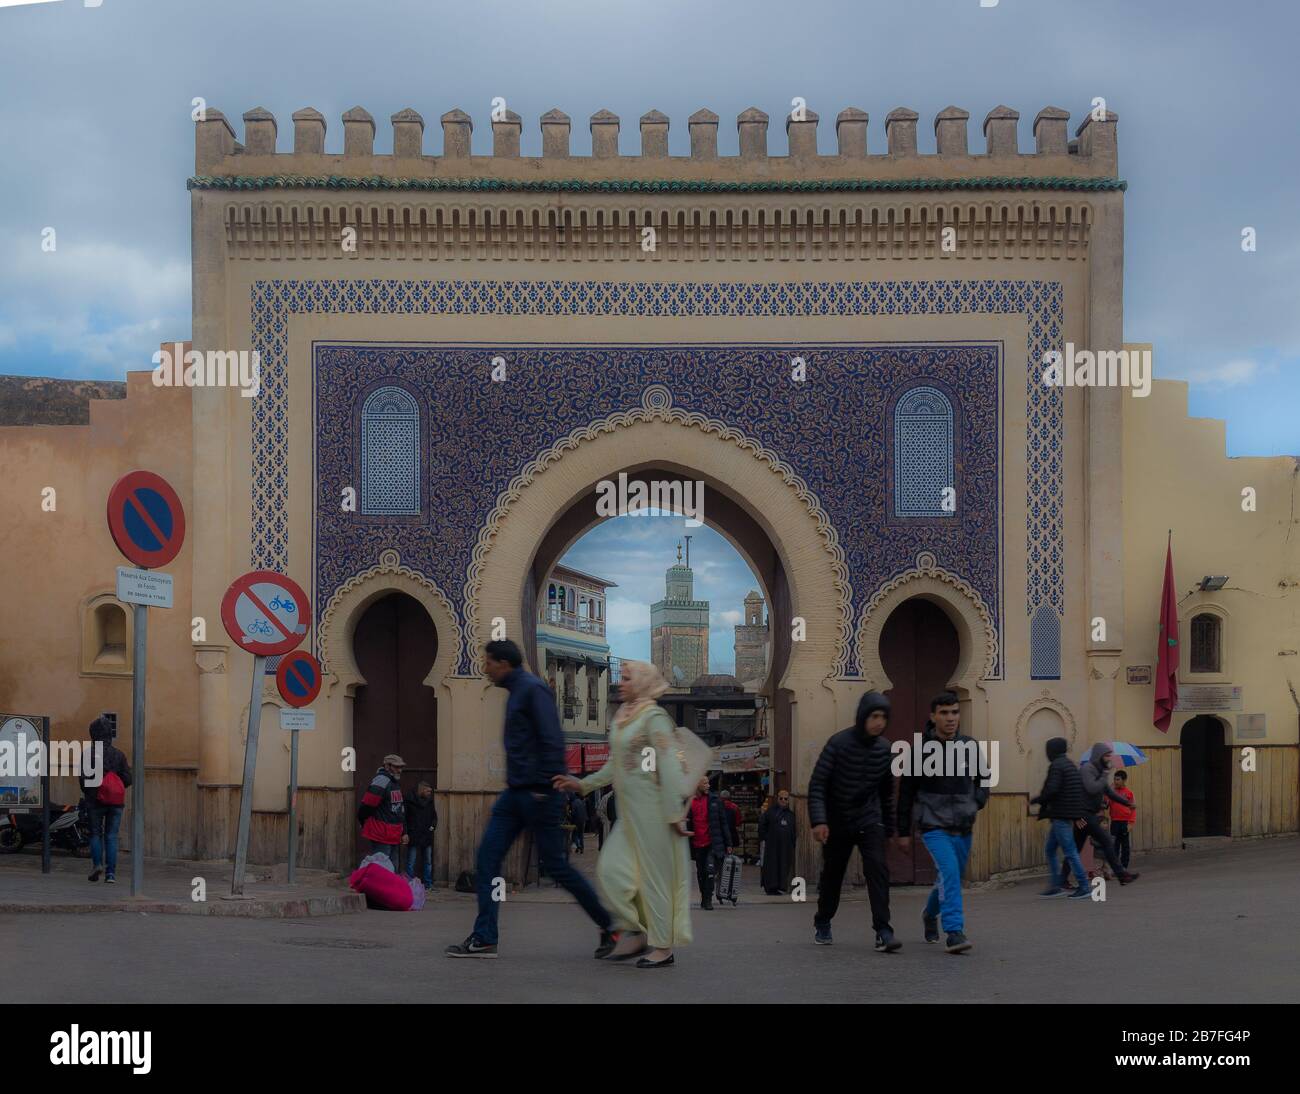 The blue door of Fez, also known as Bab Bou Jeloud,The main western entrance to Fes el-Bali, and an iconic monument of the medina of Fez. Stock Photo